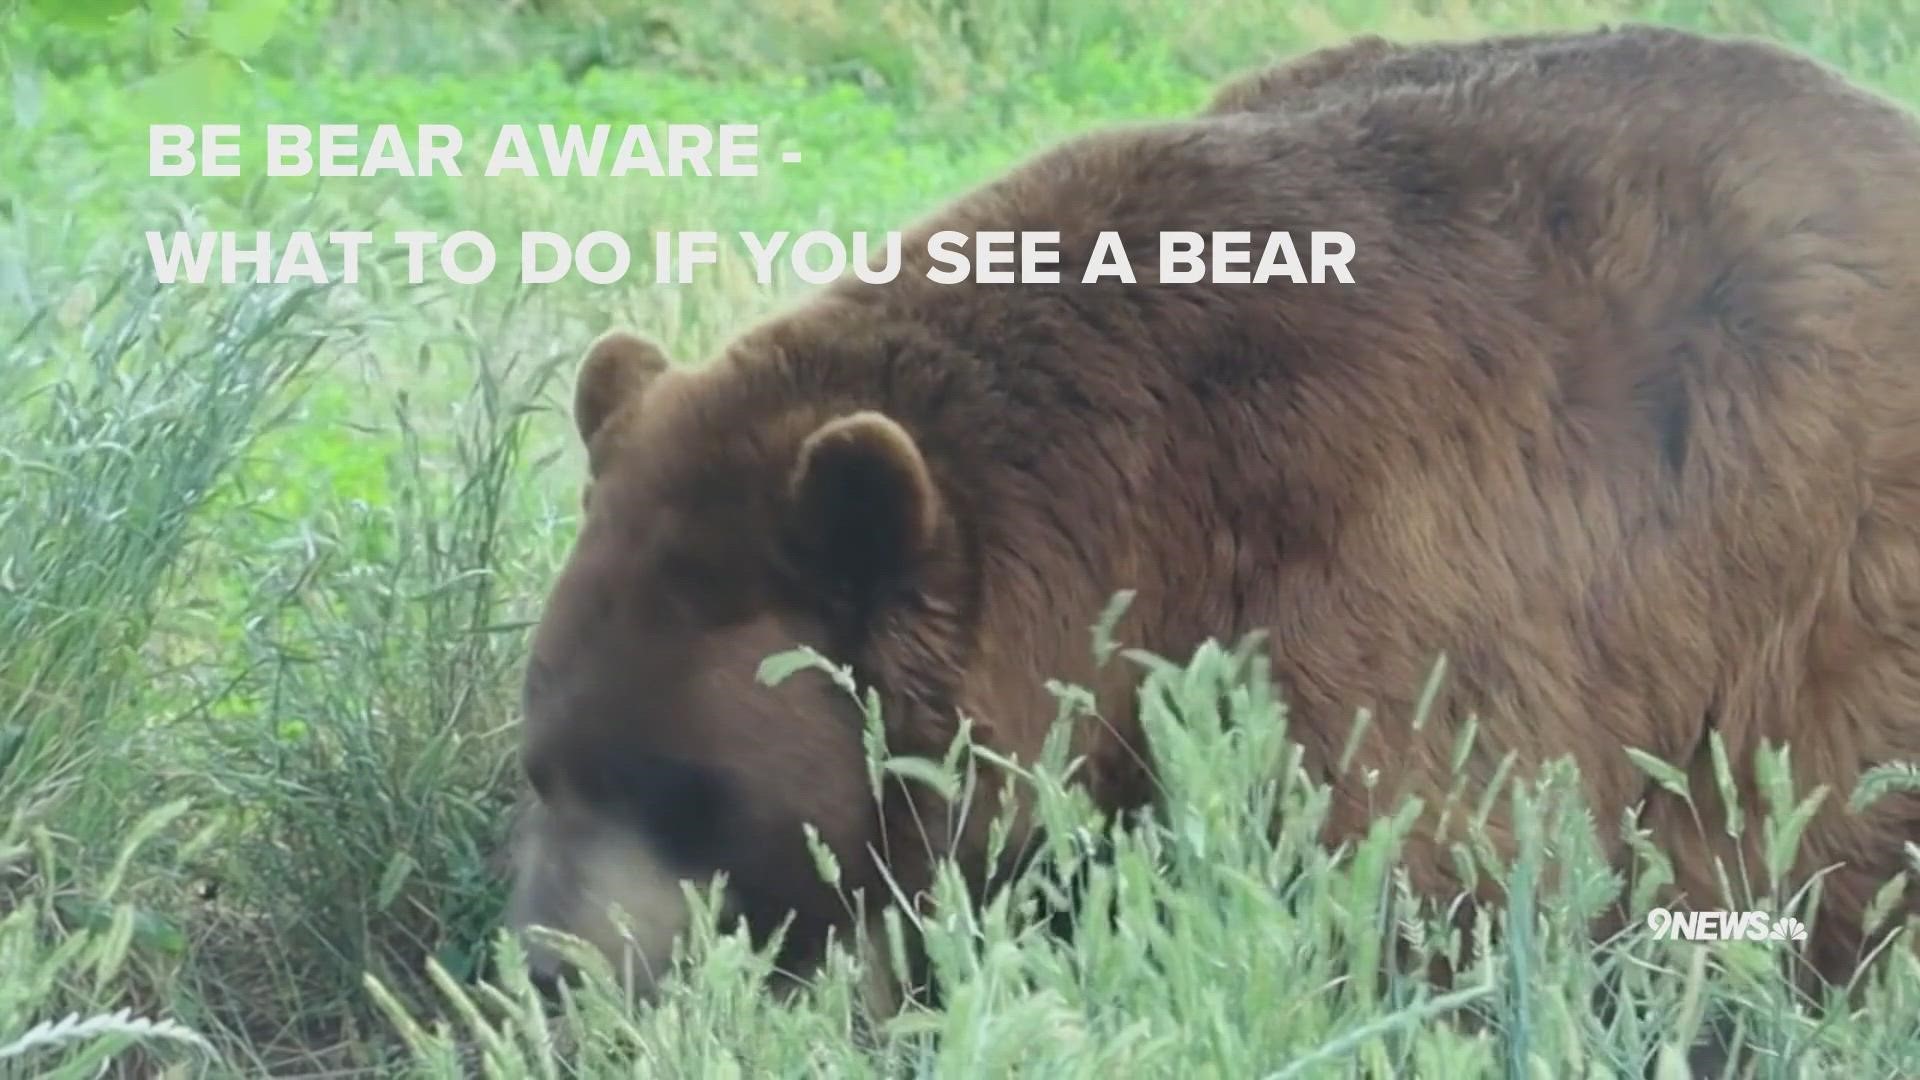 Learn about what to do if you see a bear with tips from Colorado Parks and Wildlife.